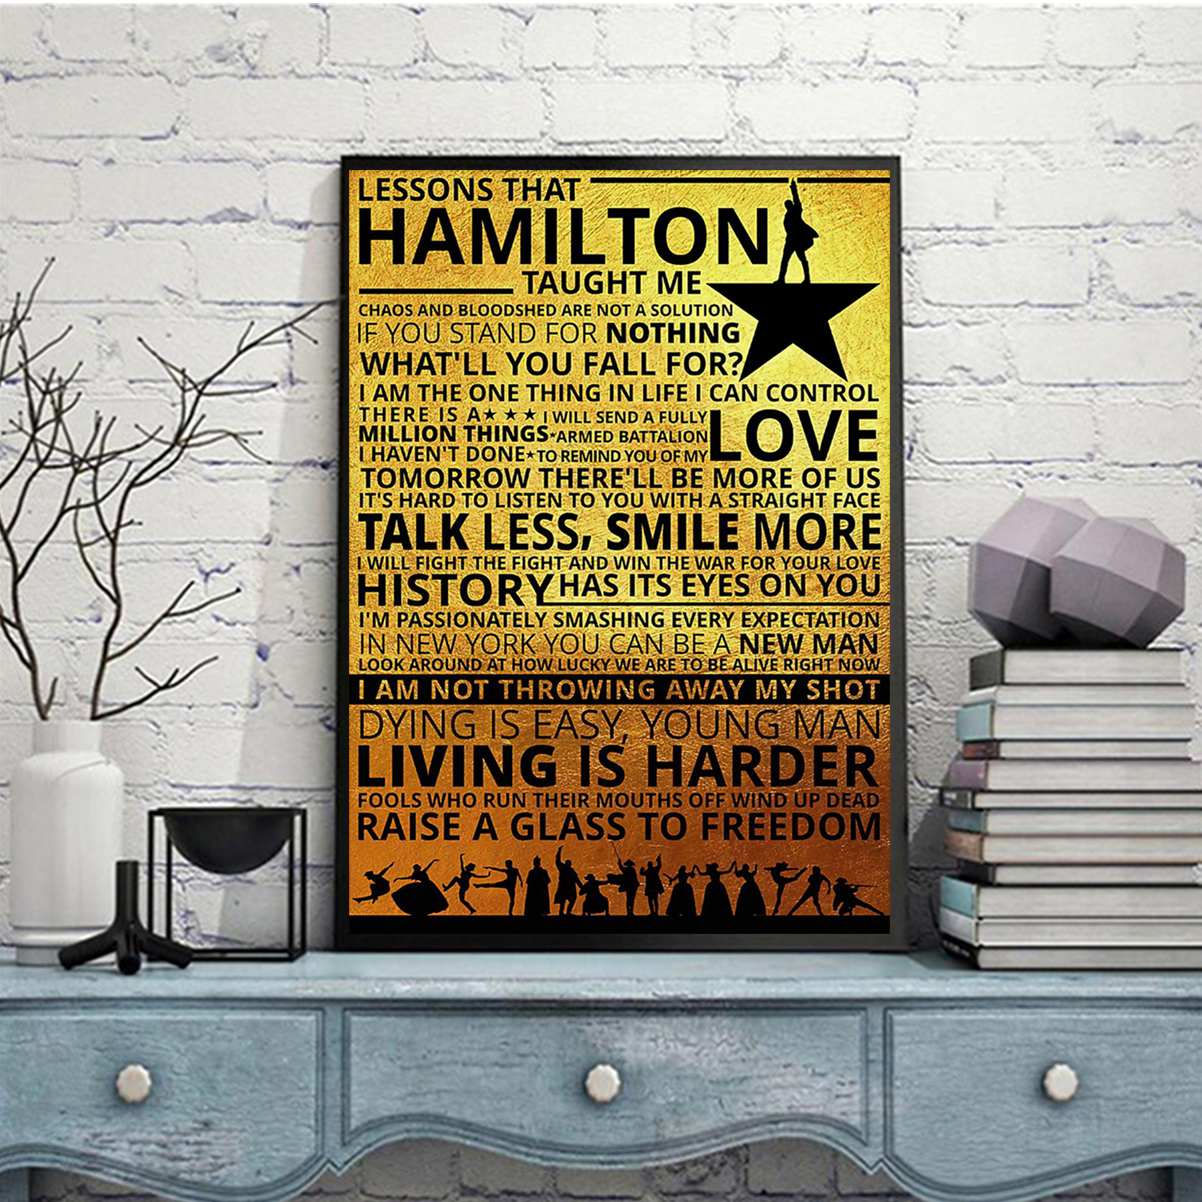 Lessons hamilton taught me poster A1